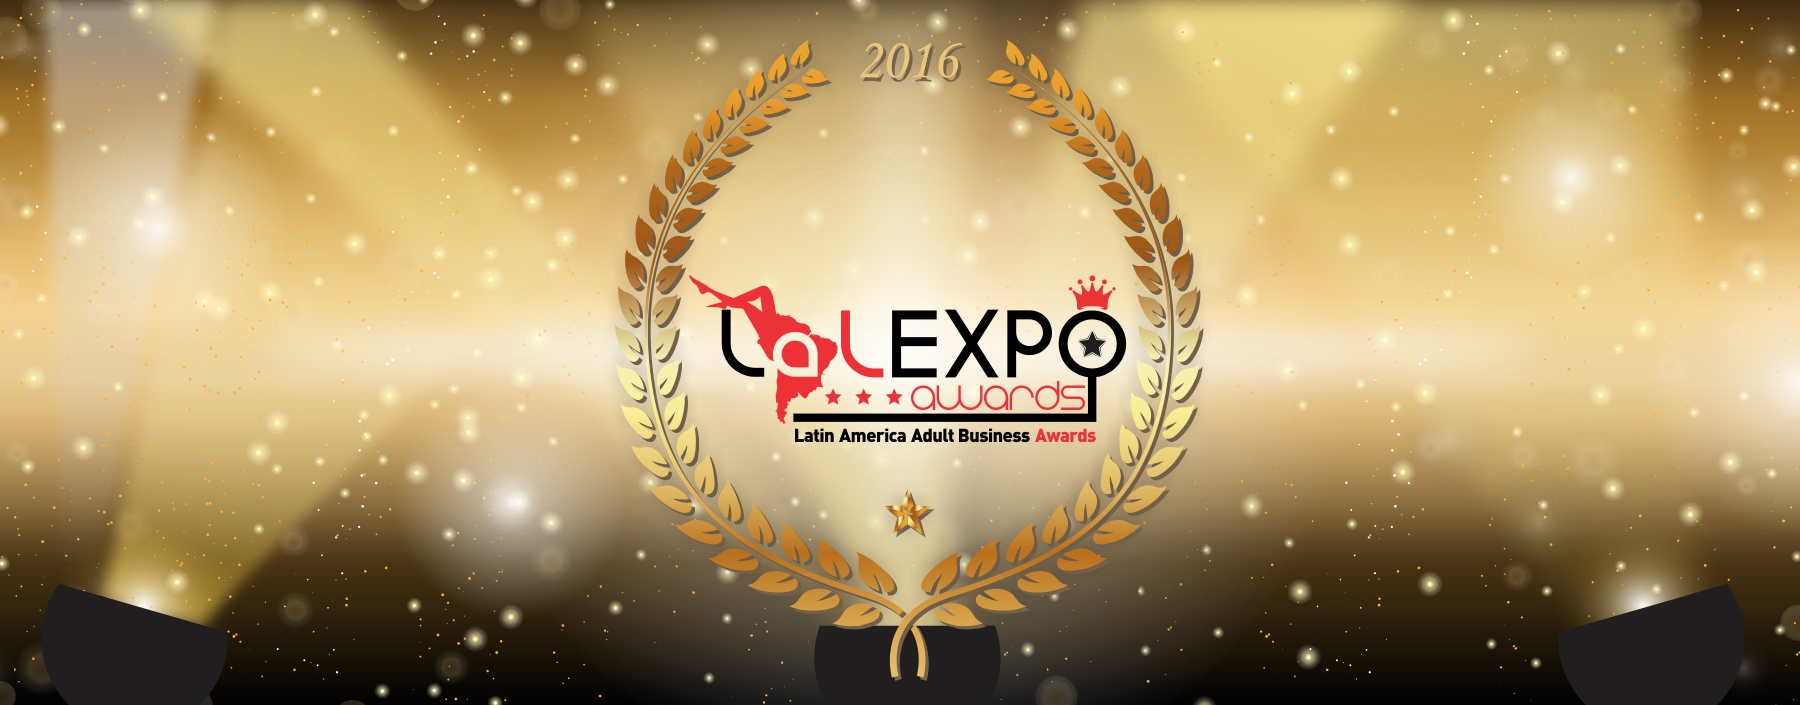 VOTE for CAM4 Nominees at the LalExpo